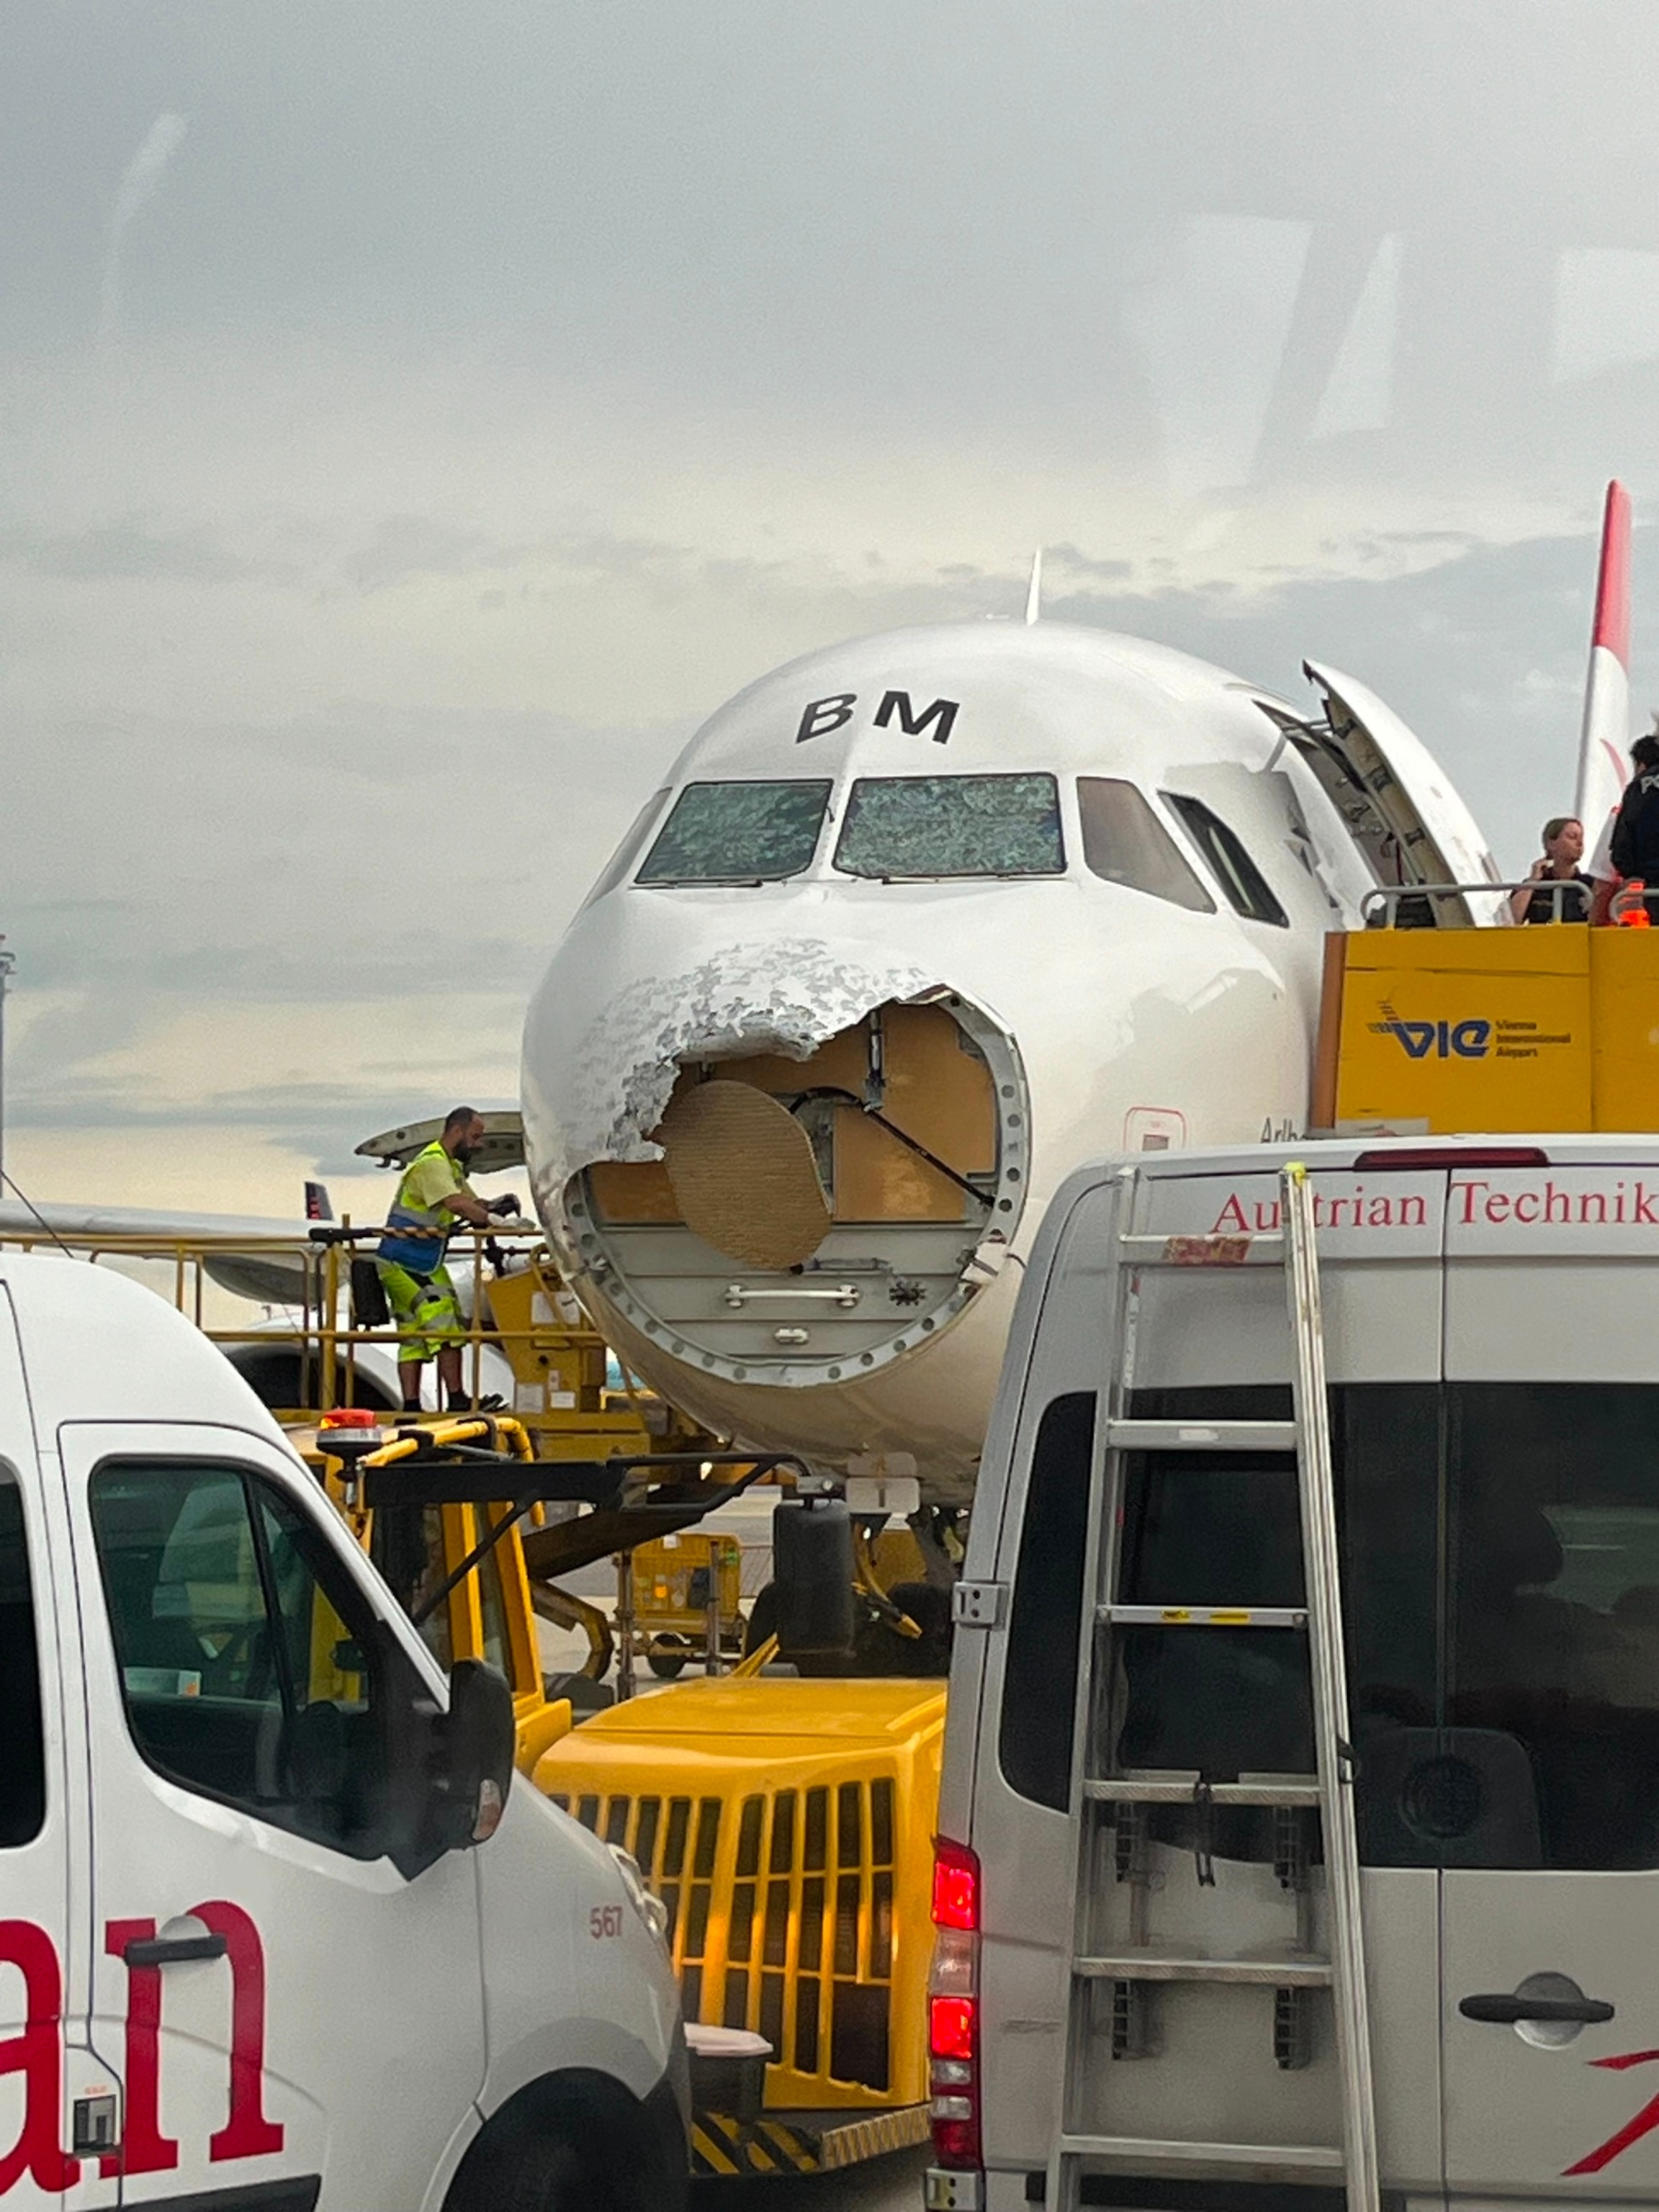 Damage is seen on an Austrian Airlines airplane in Vienna (PHOTO: @emm.ely/Instagram)